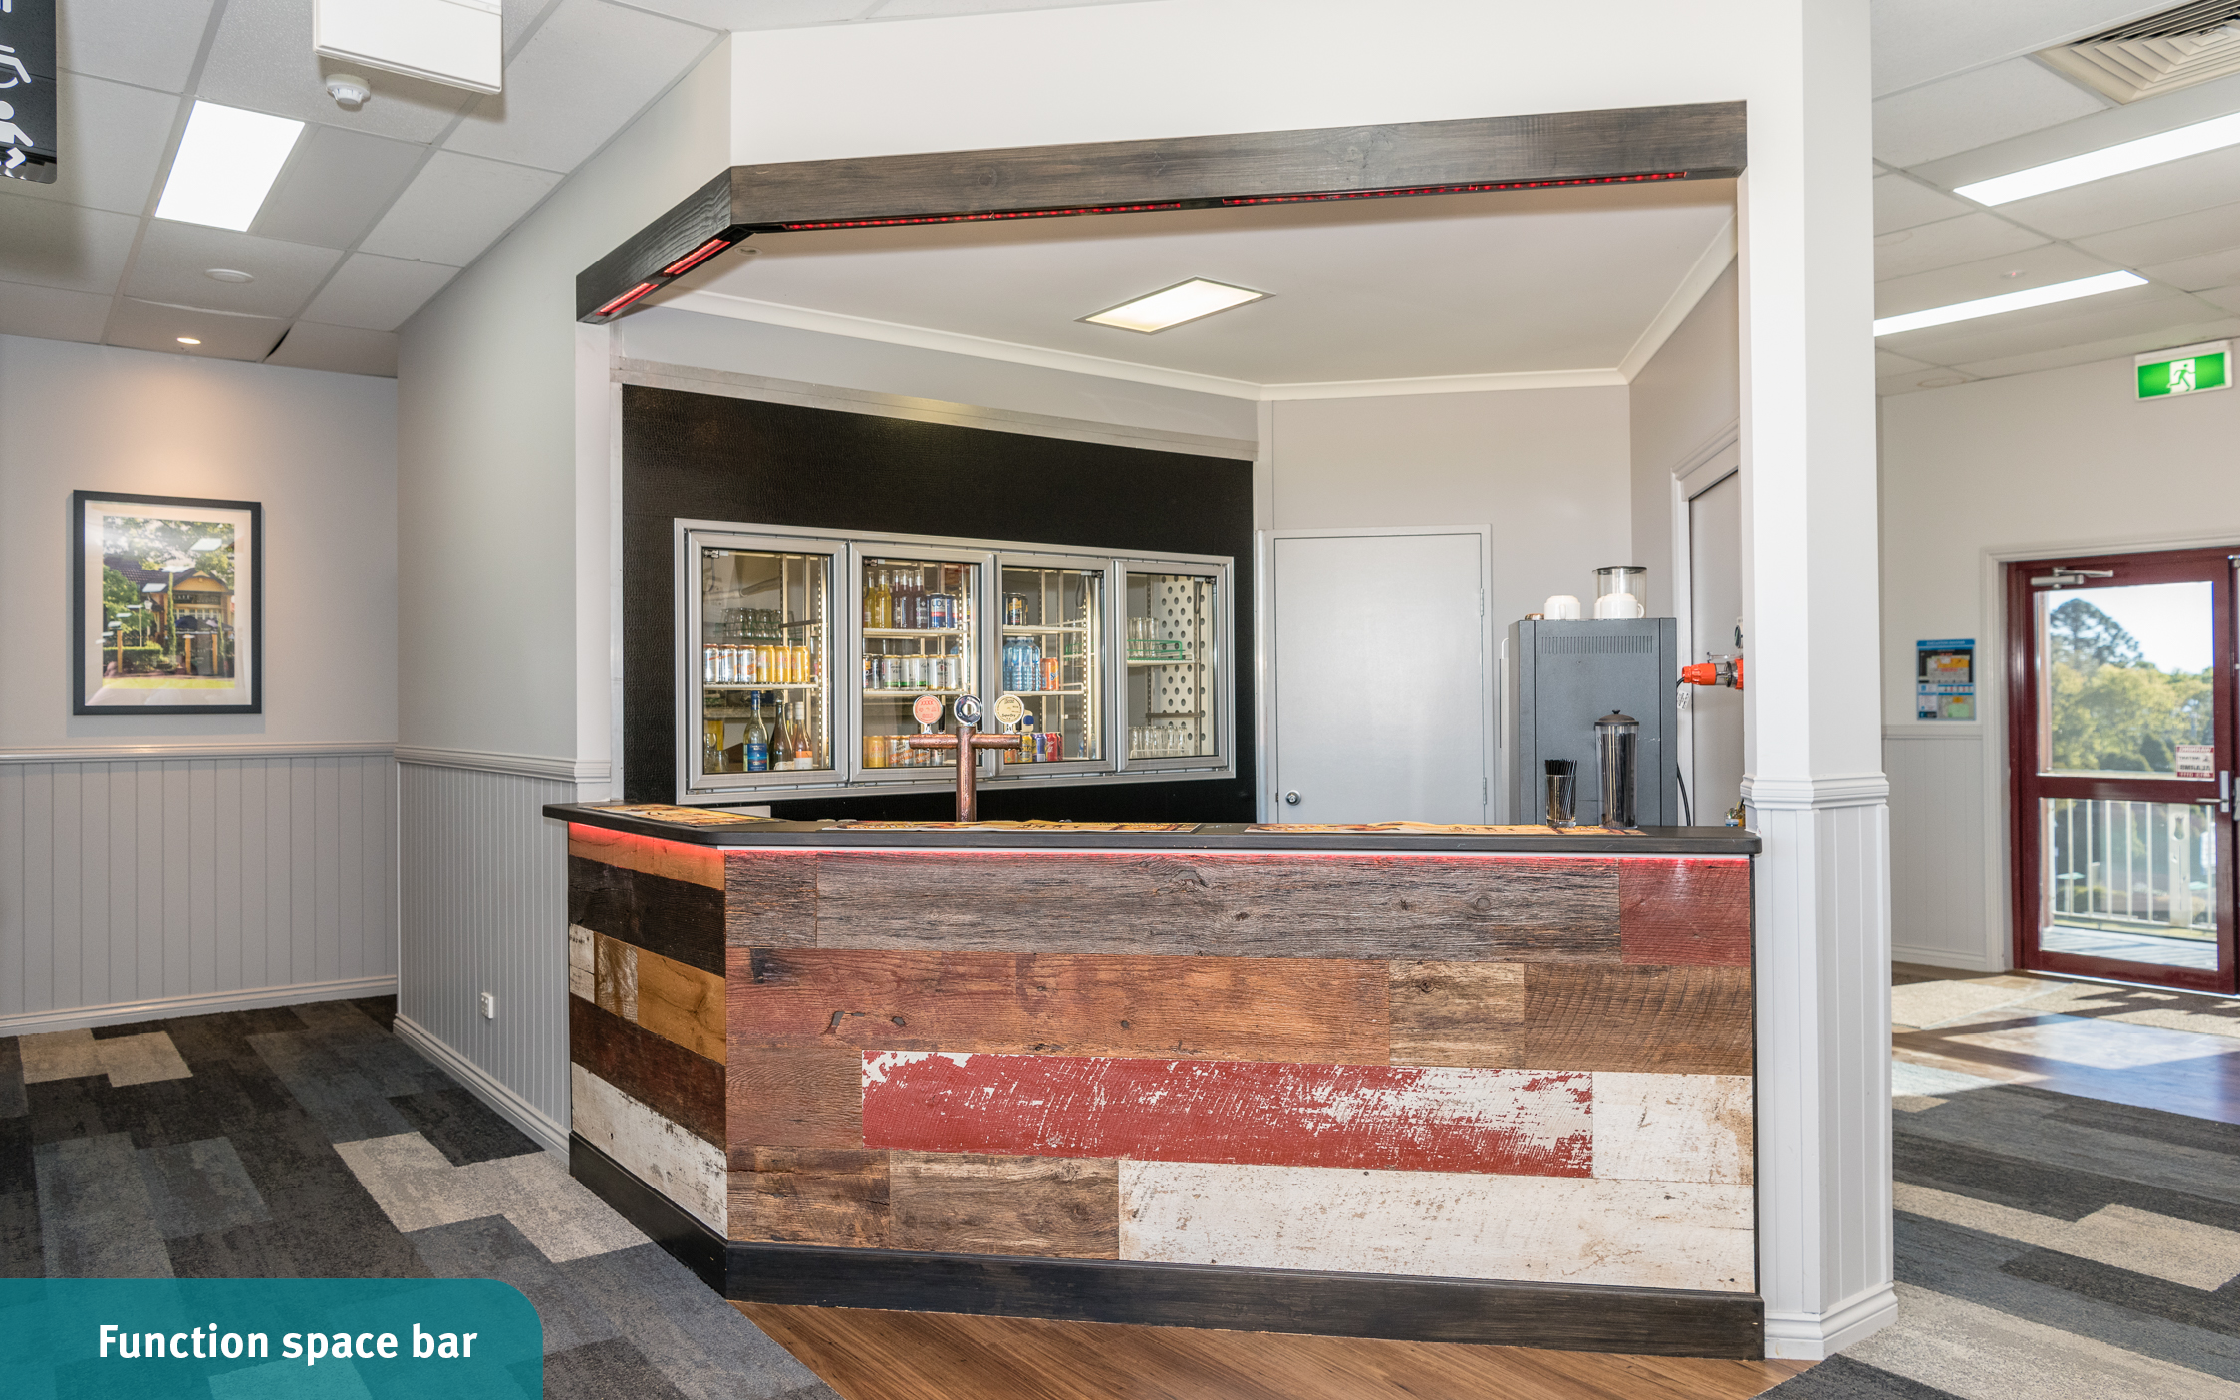 The indoor function room bar stocked with cold drinks at the Toowoomba Sports Grounds.